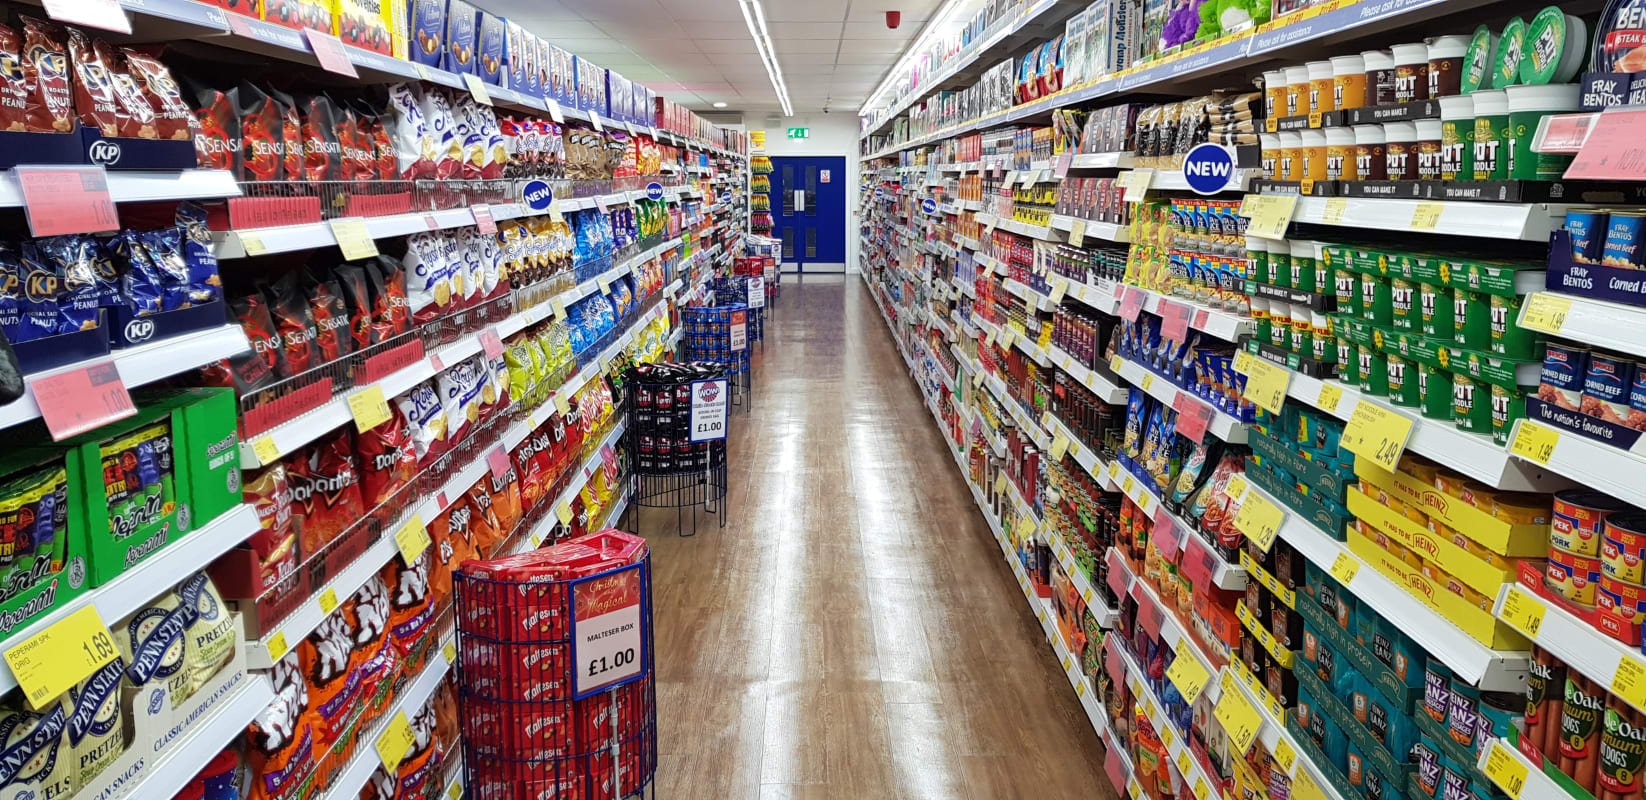 You can grab all your usual groceries at B&M's new store in Speke, located at The Speke Centre.